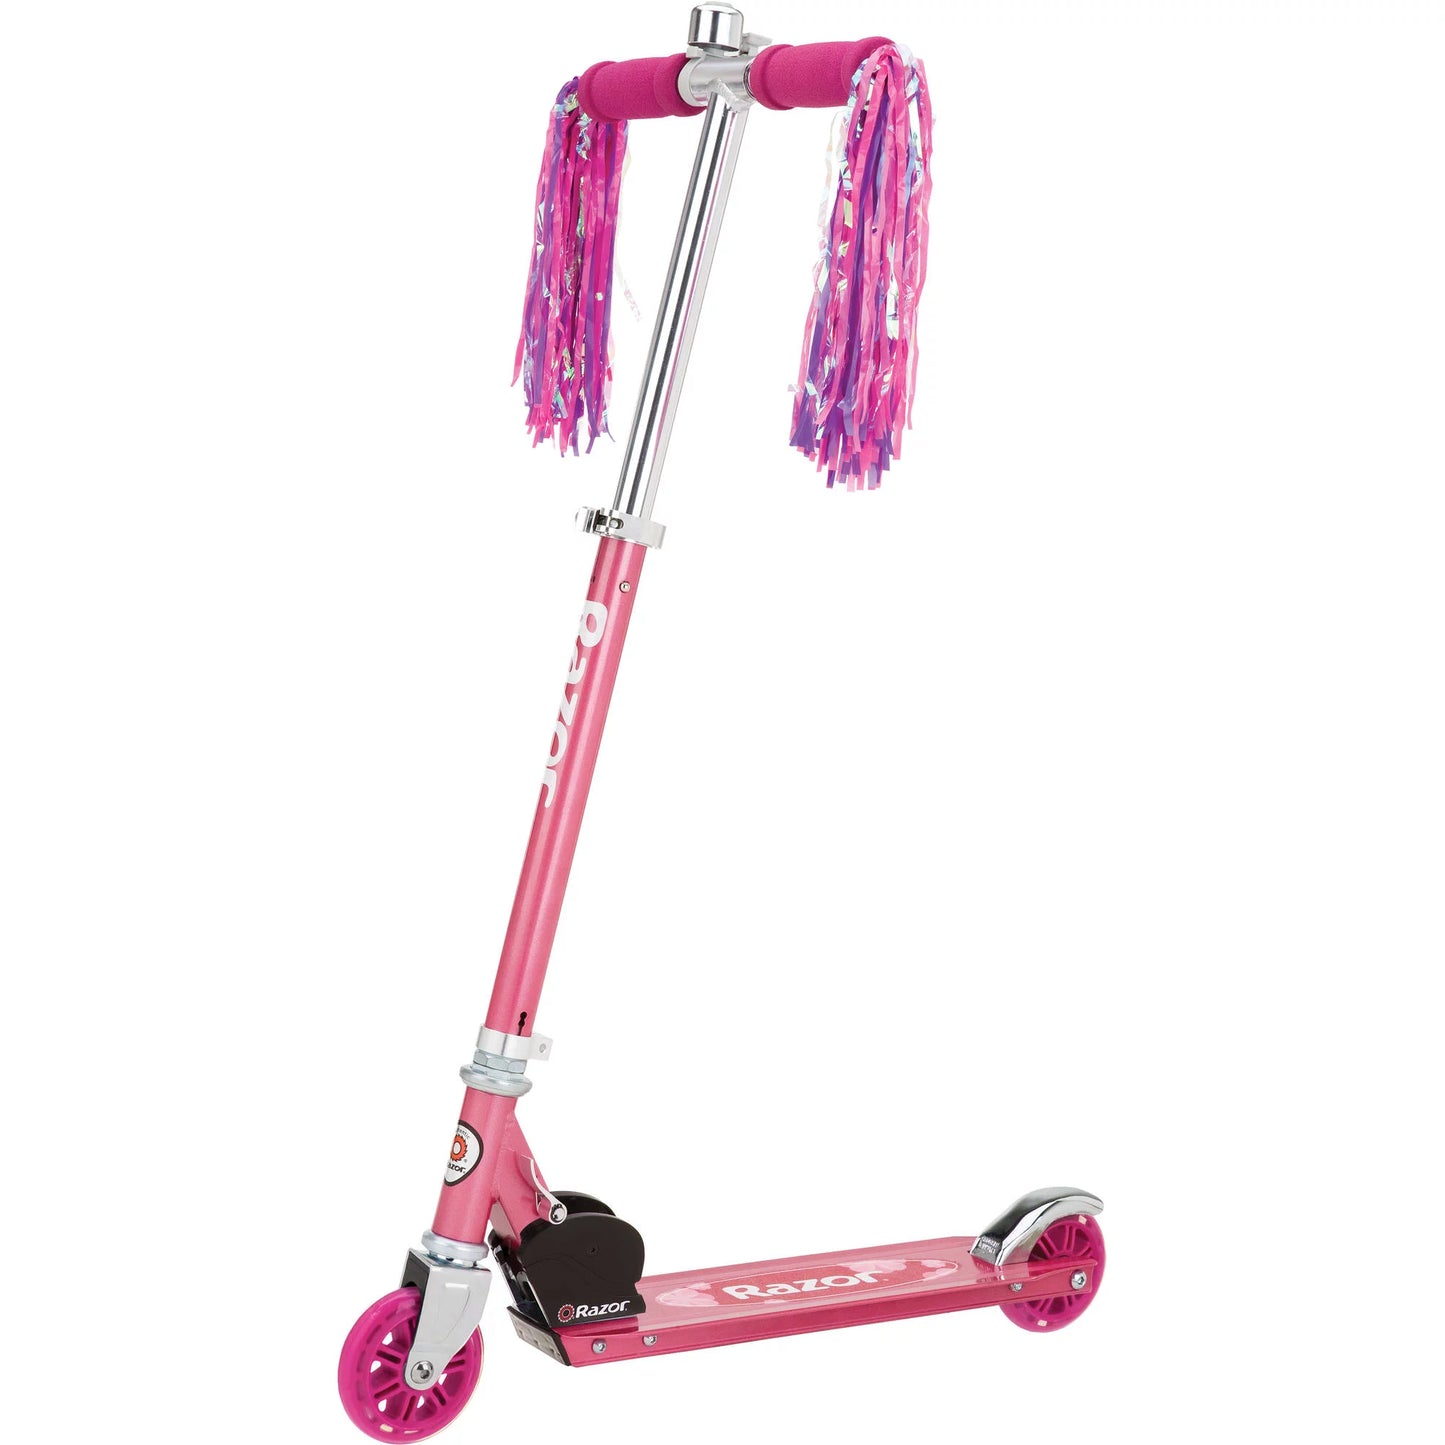 Razor A Kick Scooter for Kids - Sweet Pea, Lightweight, Foldable, Aluminum Frame, for Child Ages 5+ (13012062)